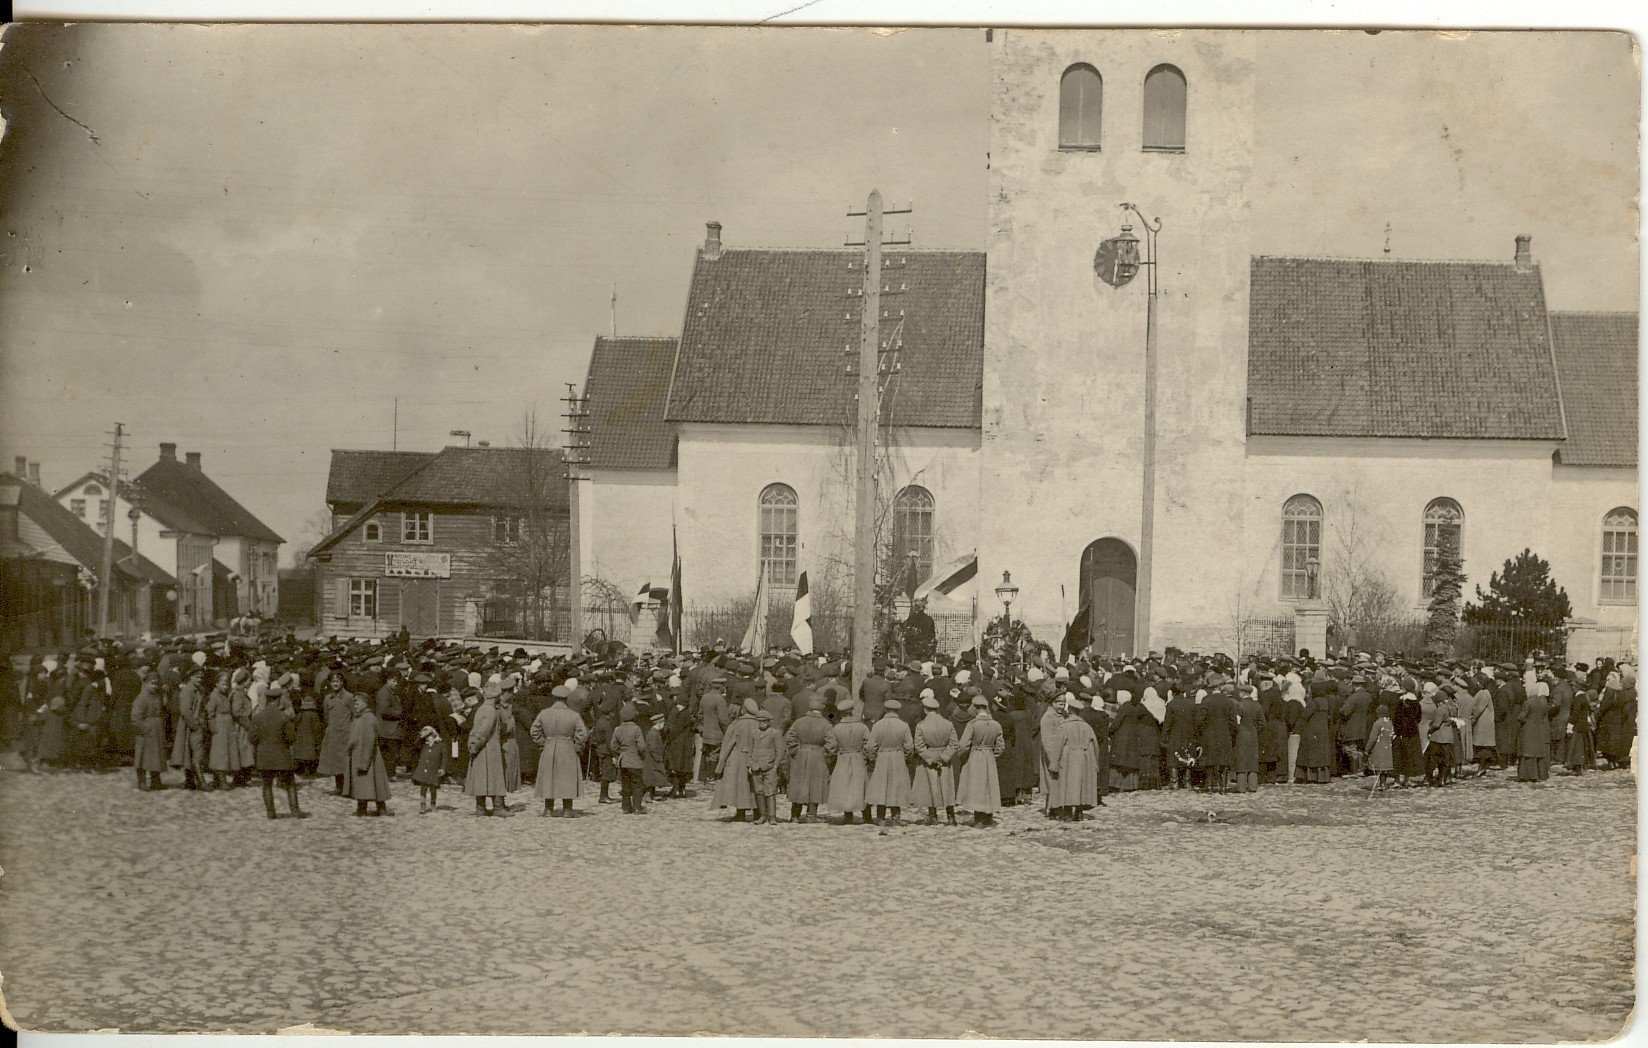 Photo, May 1 demonstration Paides 1917.